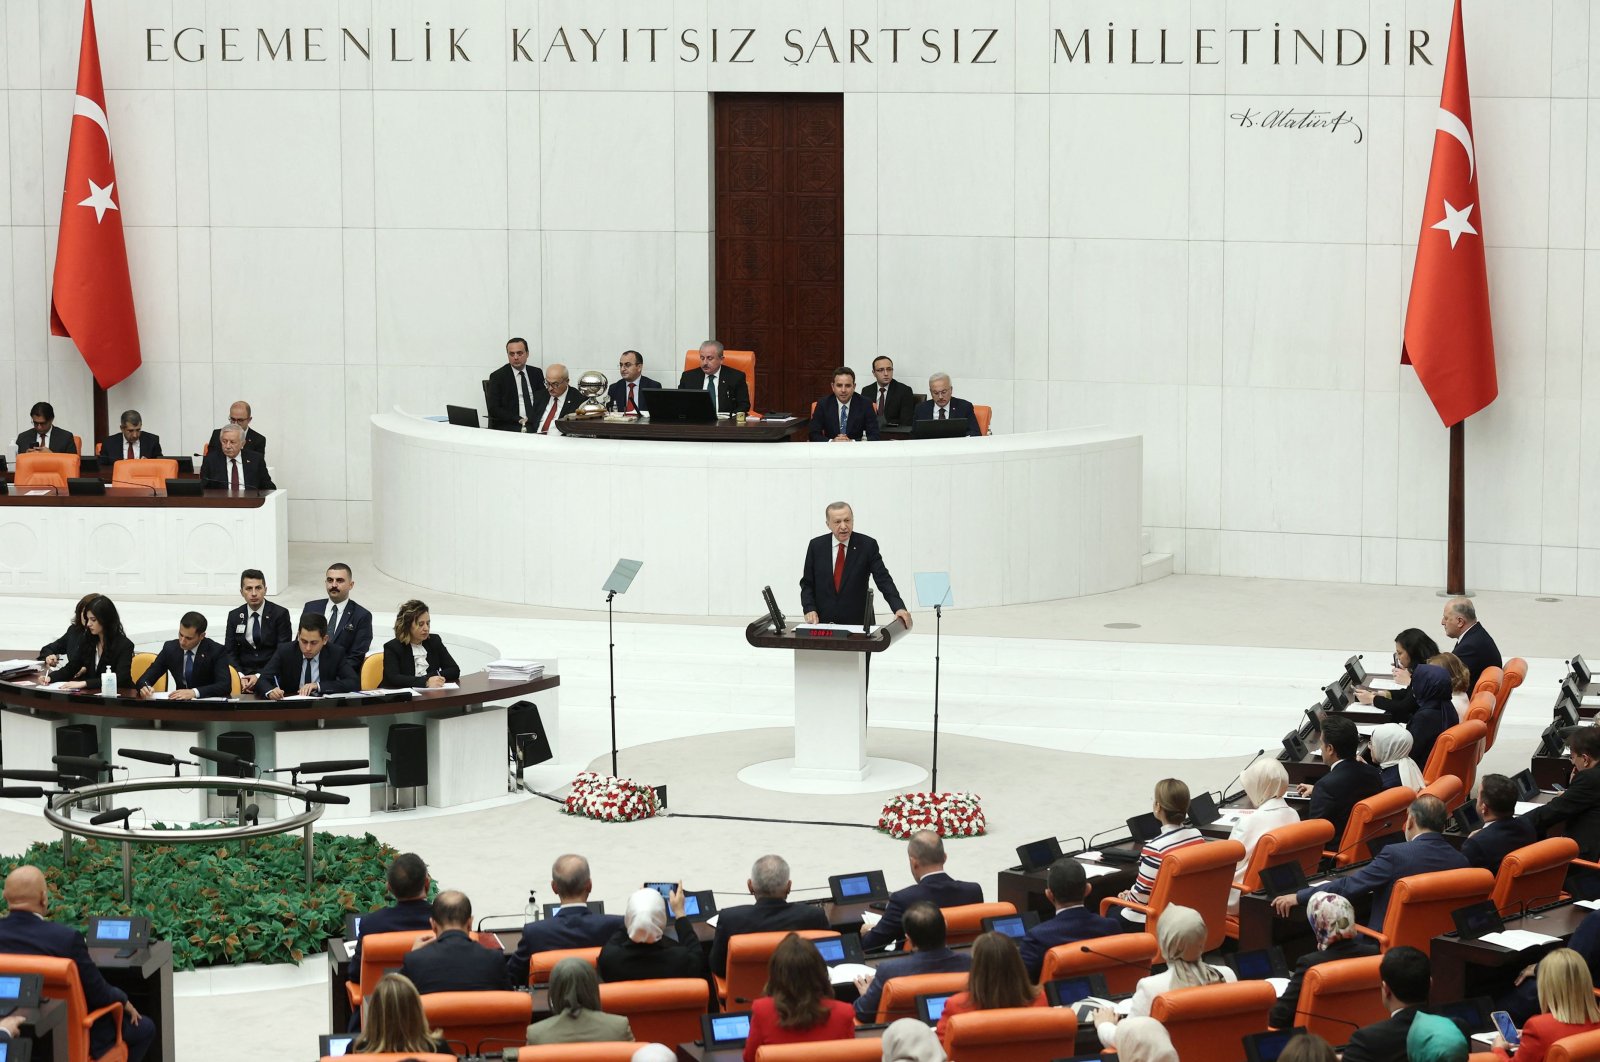 President Recep Tayyip Erdoğan addresses Parliament to mark the opening of the new legislative year, at the Grand National Assembly of Türkiye in Ankara, Oct. 1, 2022. (AFP Photo)